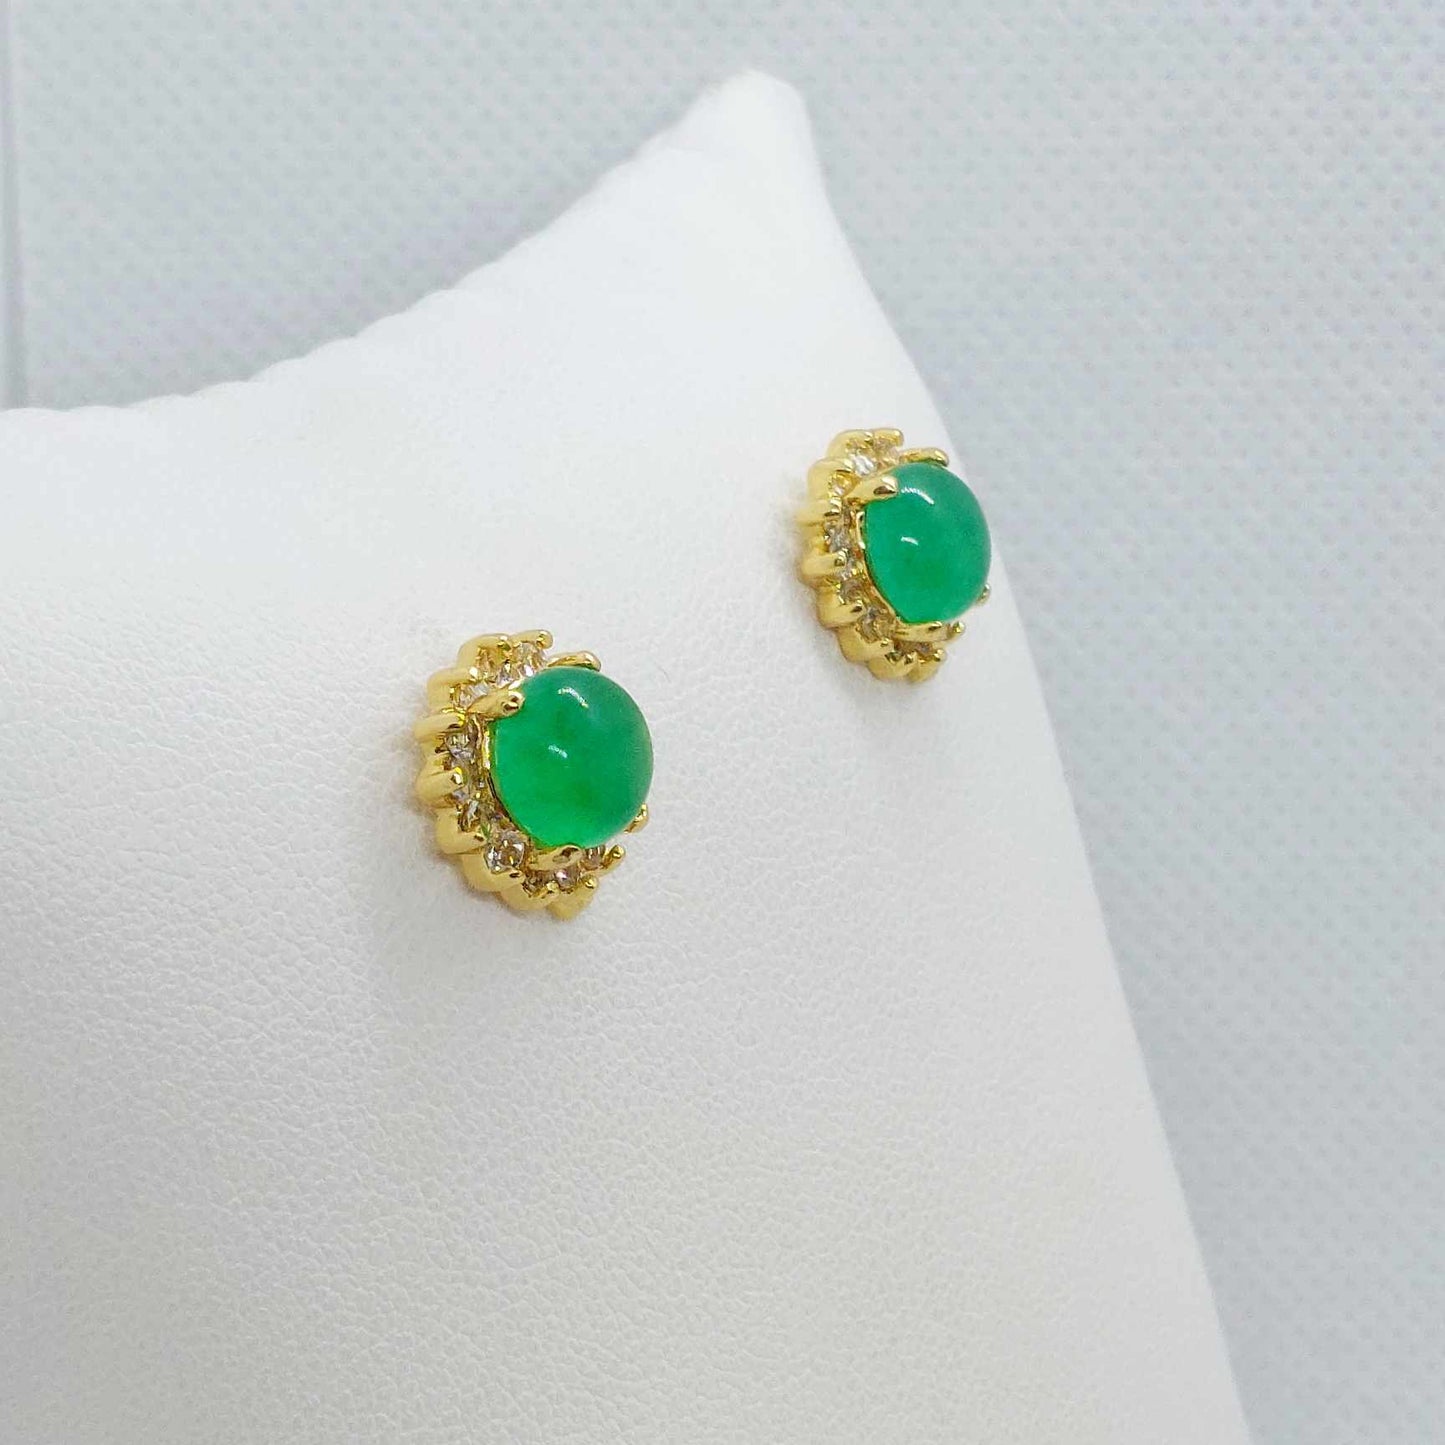 Natural Jade with Zircon Stud Earrings in Gold Plated Sterling Silver